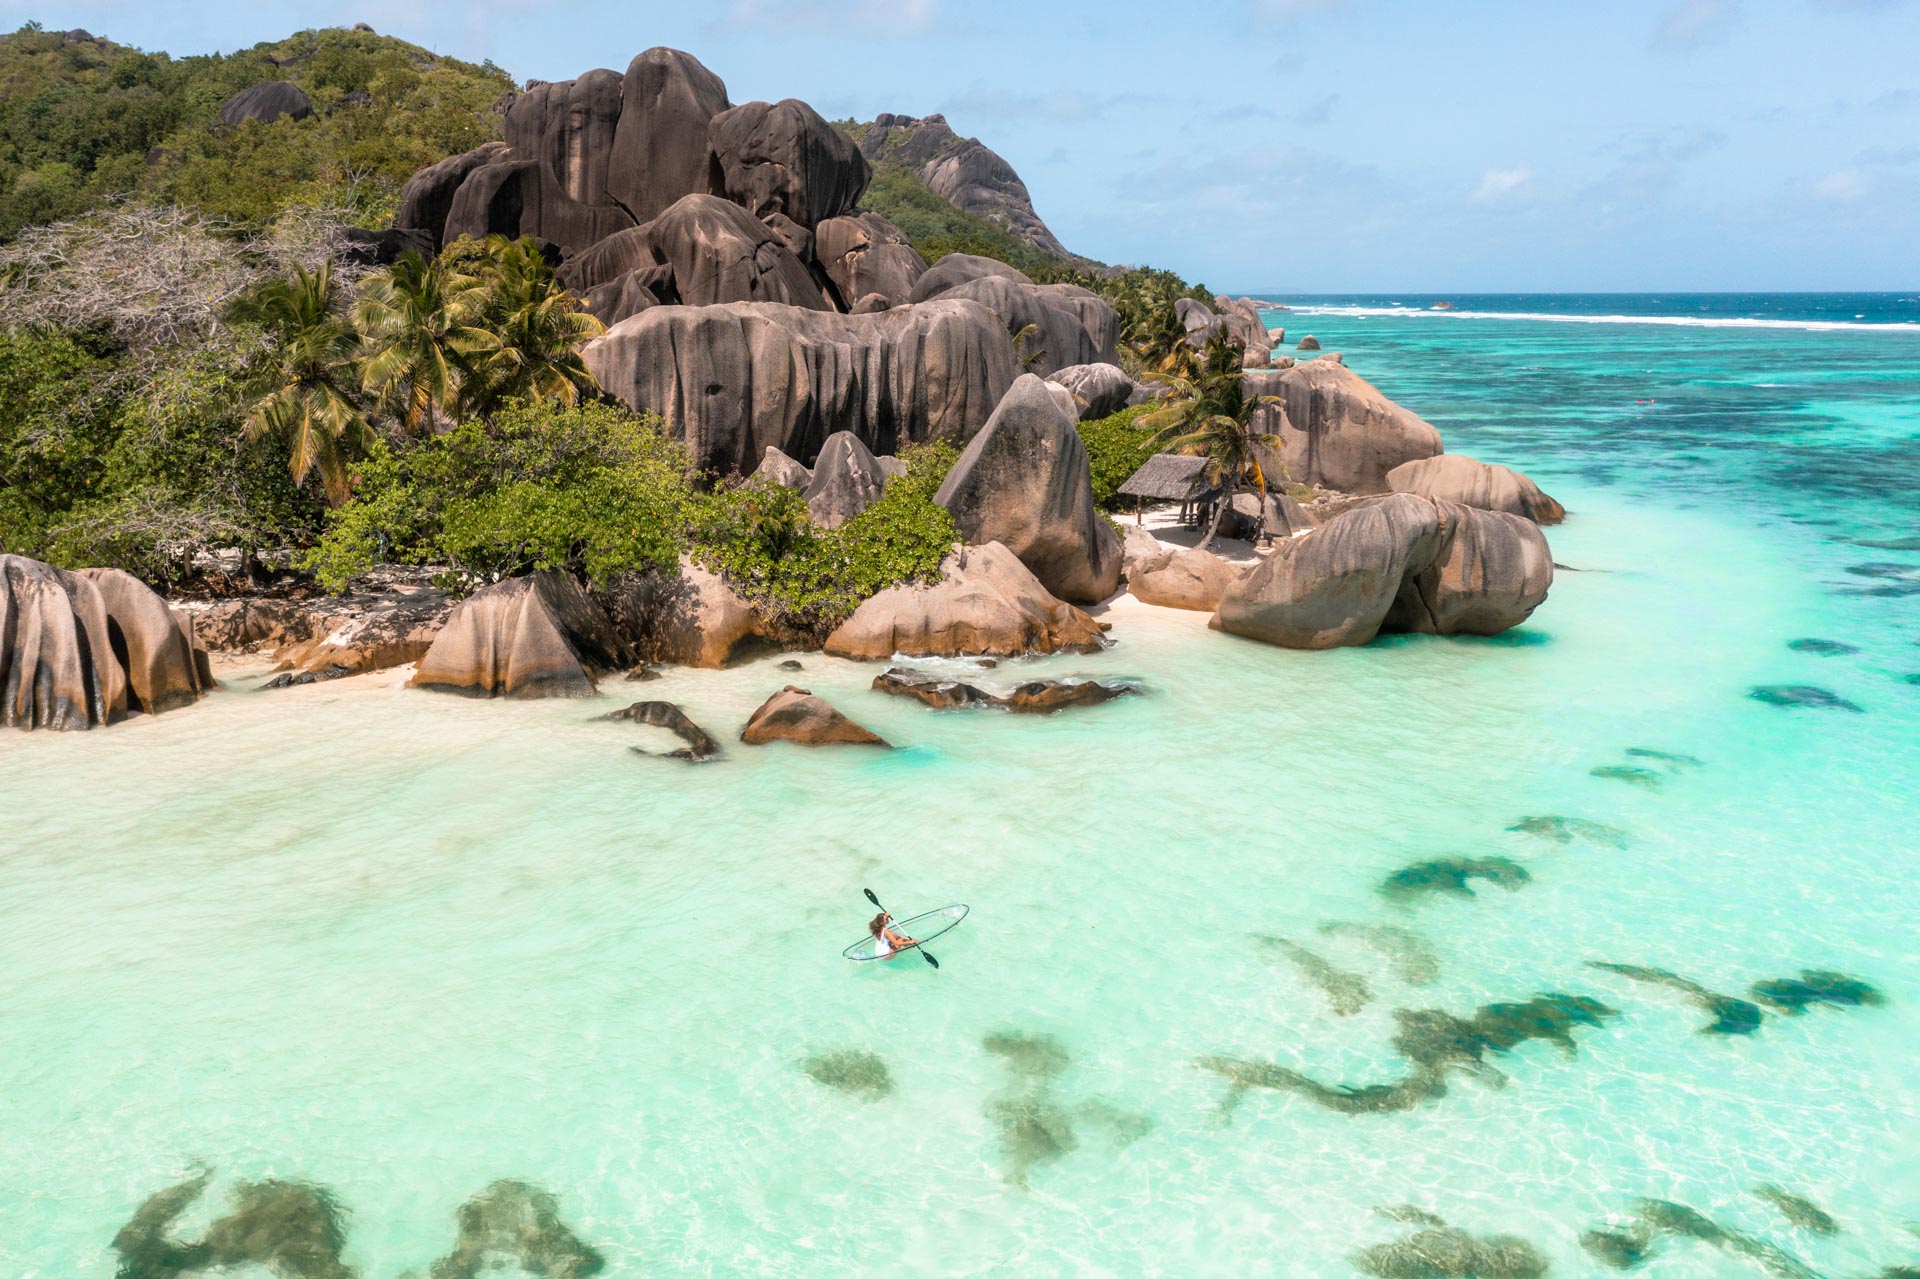 La Digue Island Travel Guide: 15 Best Beaches & Things To Do